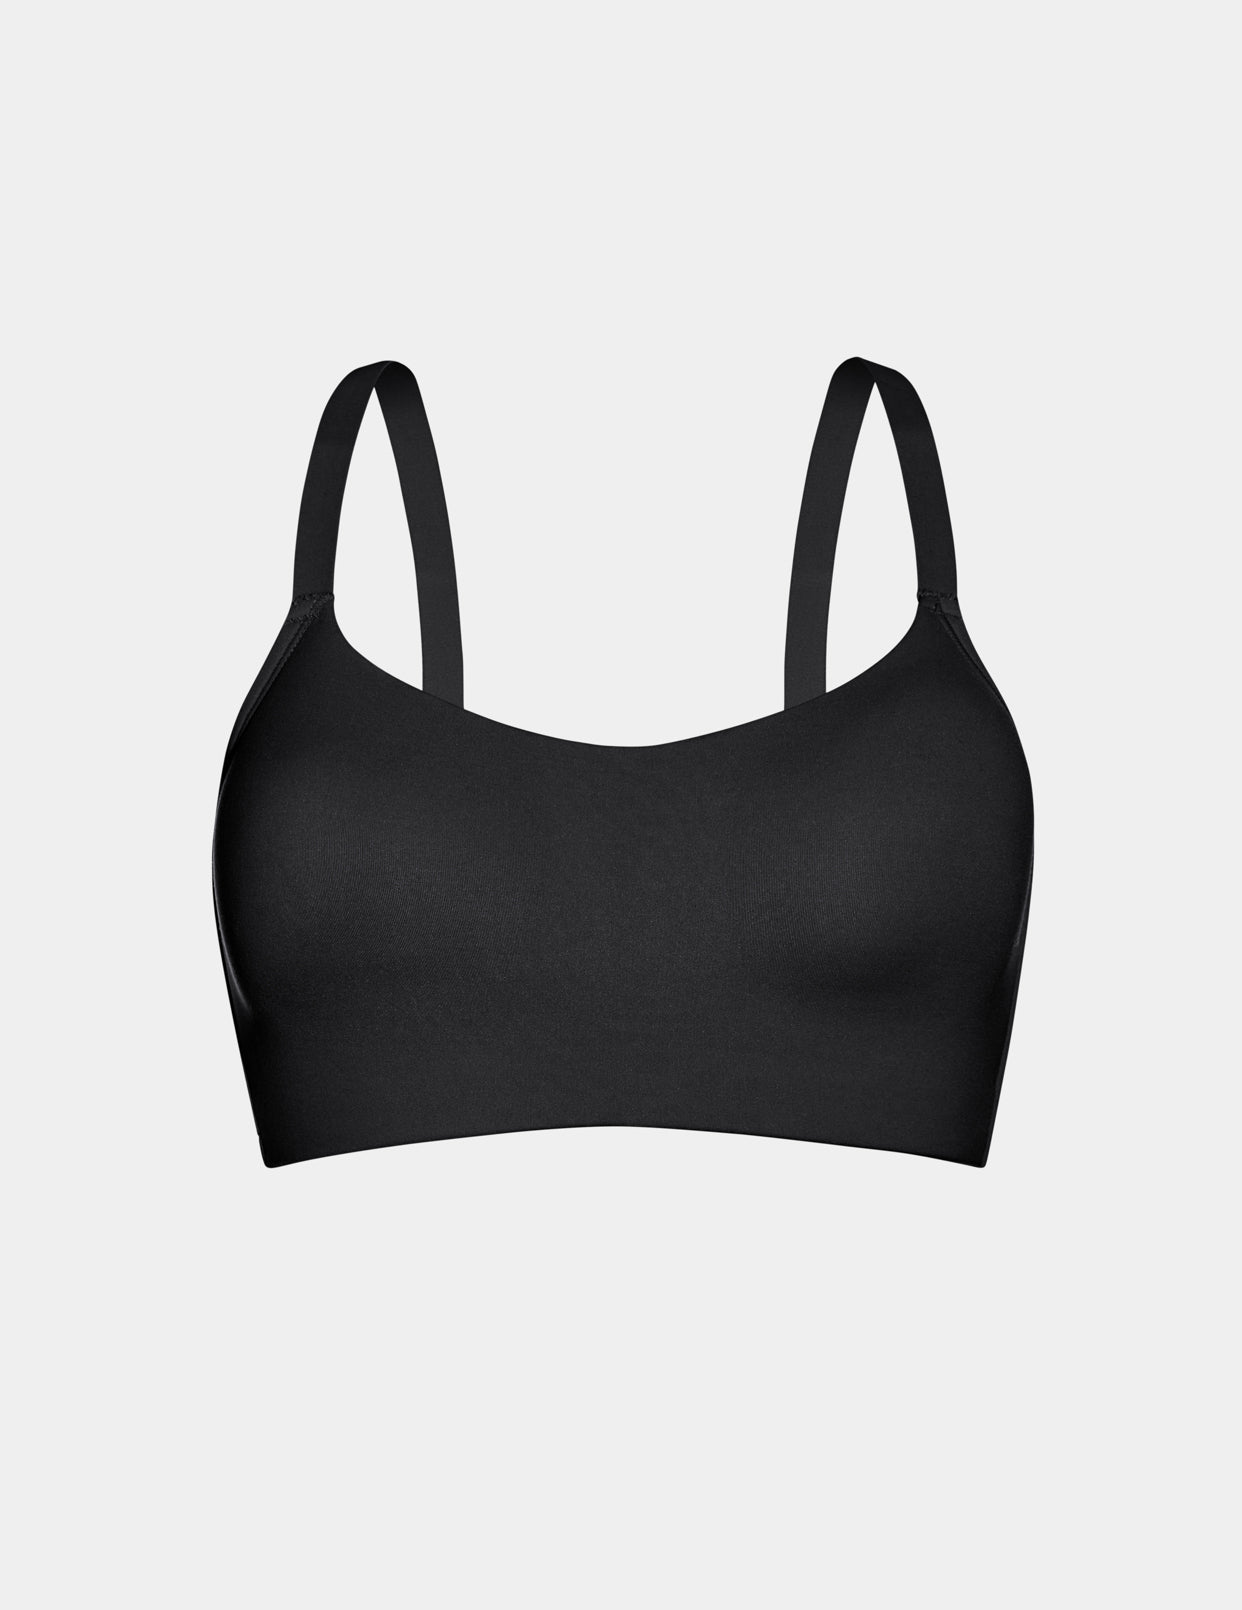 Discover Ultimate Comfort with Knix's Newest Everyday Bra: The One & Only  Scoop Bra